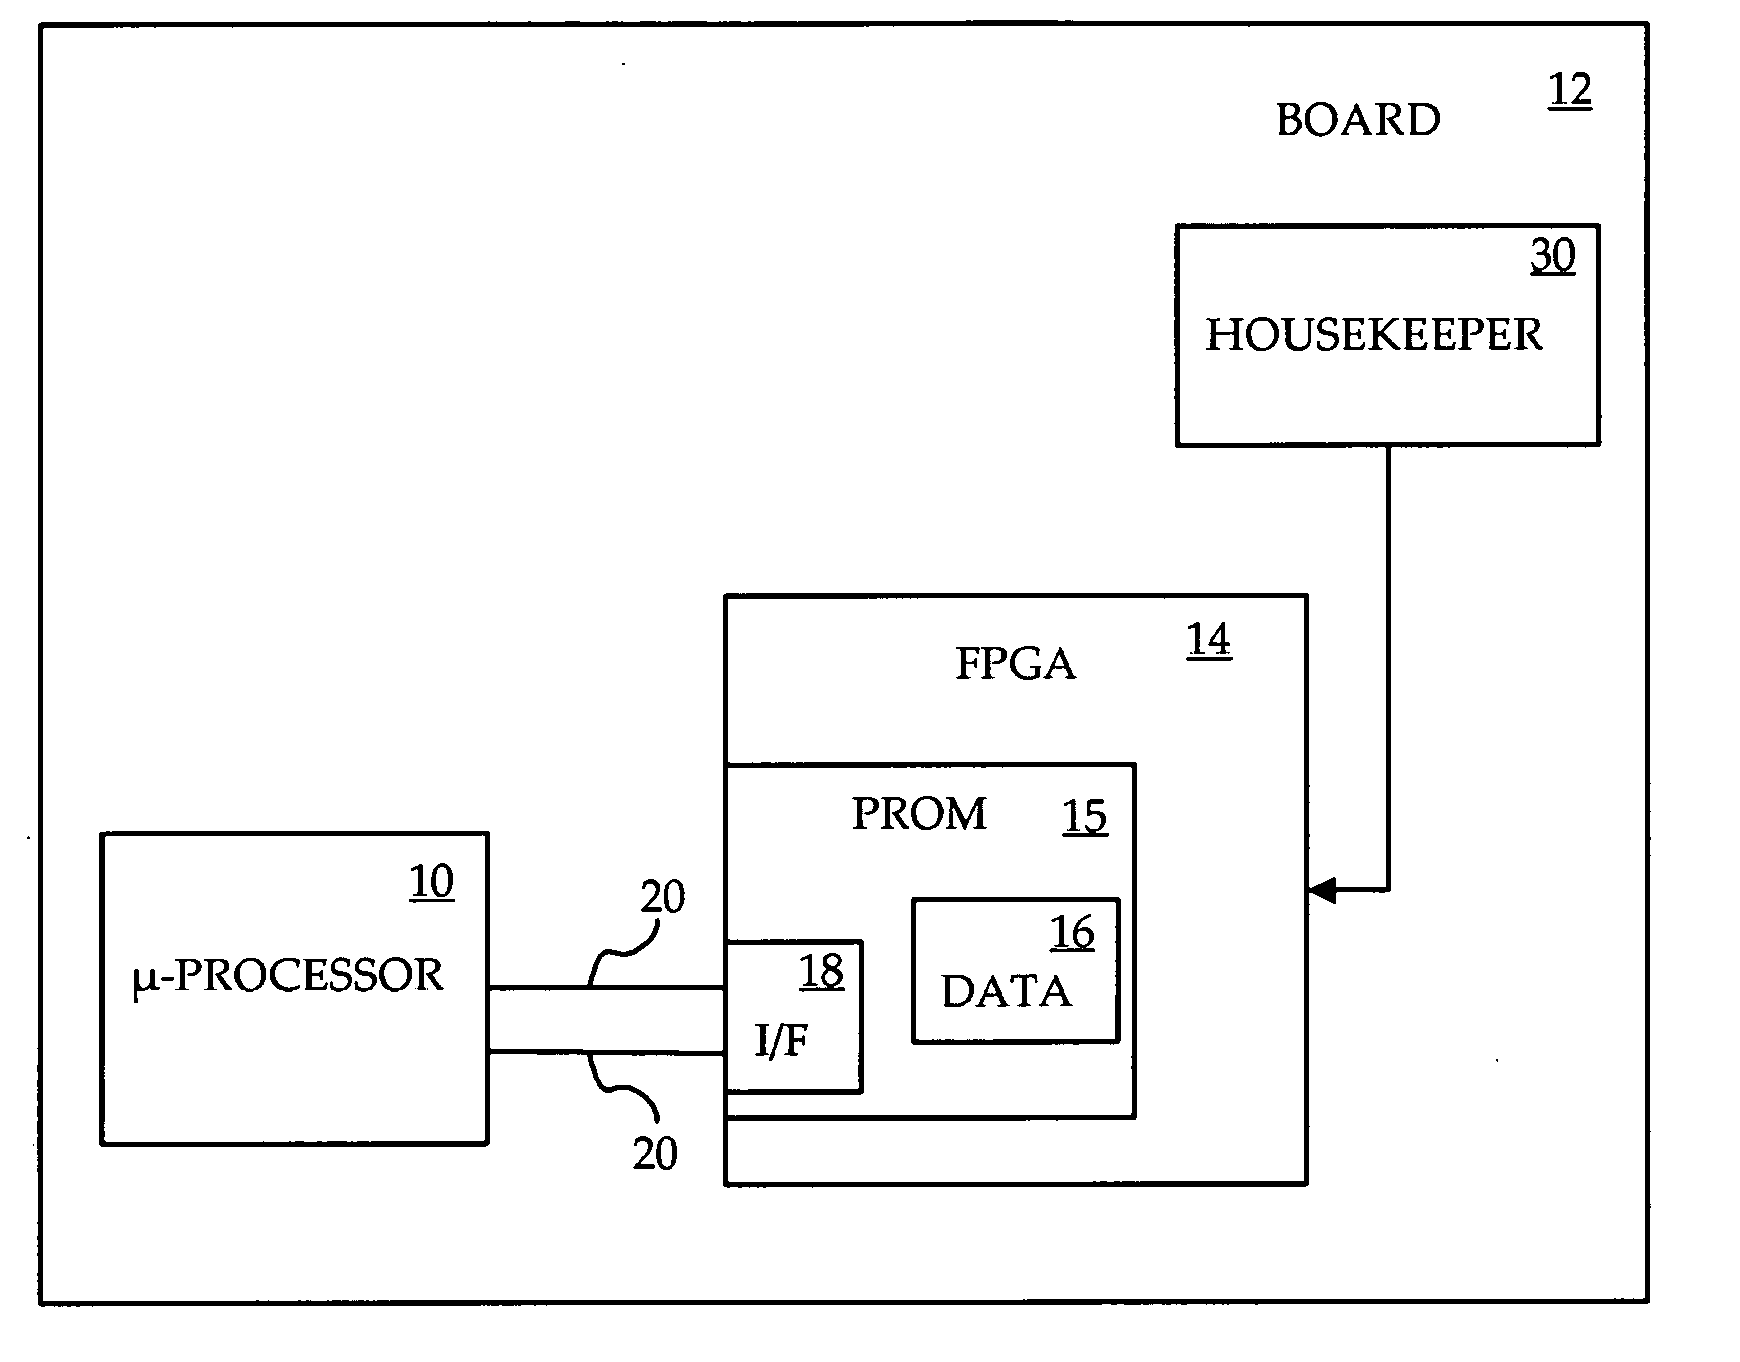 Implementing a microprocessor boot configuration prom within an FPGA